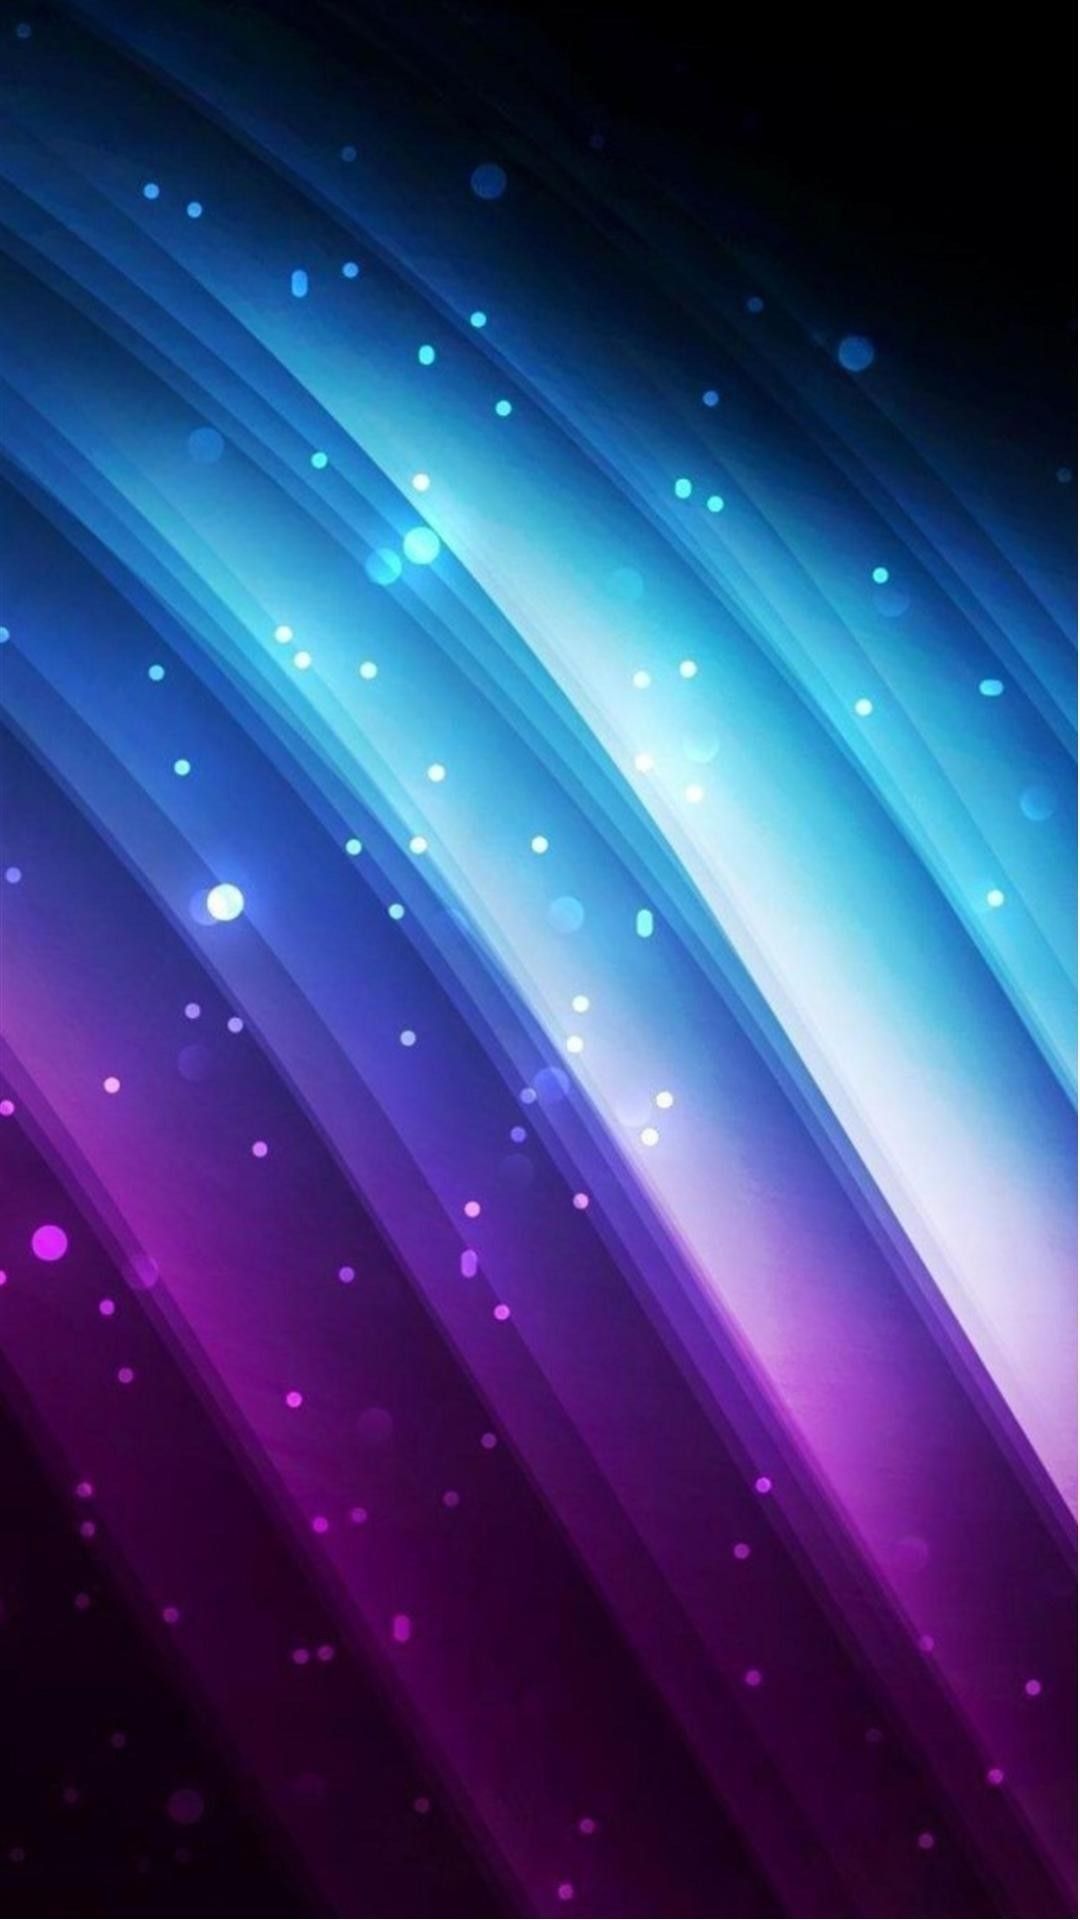 Free Mobile Wallpaper Themes Cool Background For Your Cell Phone